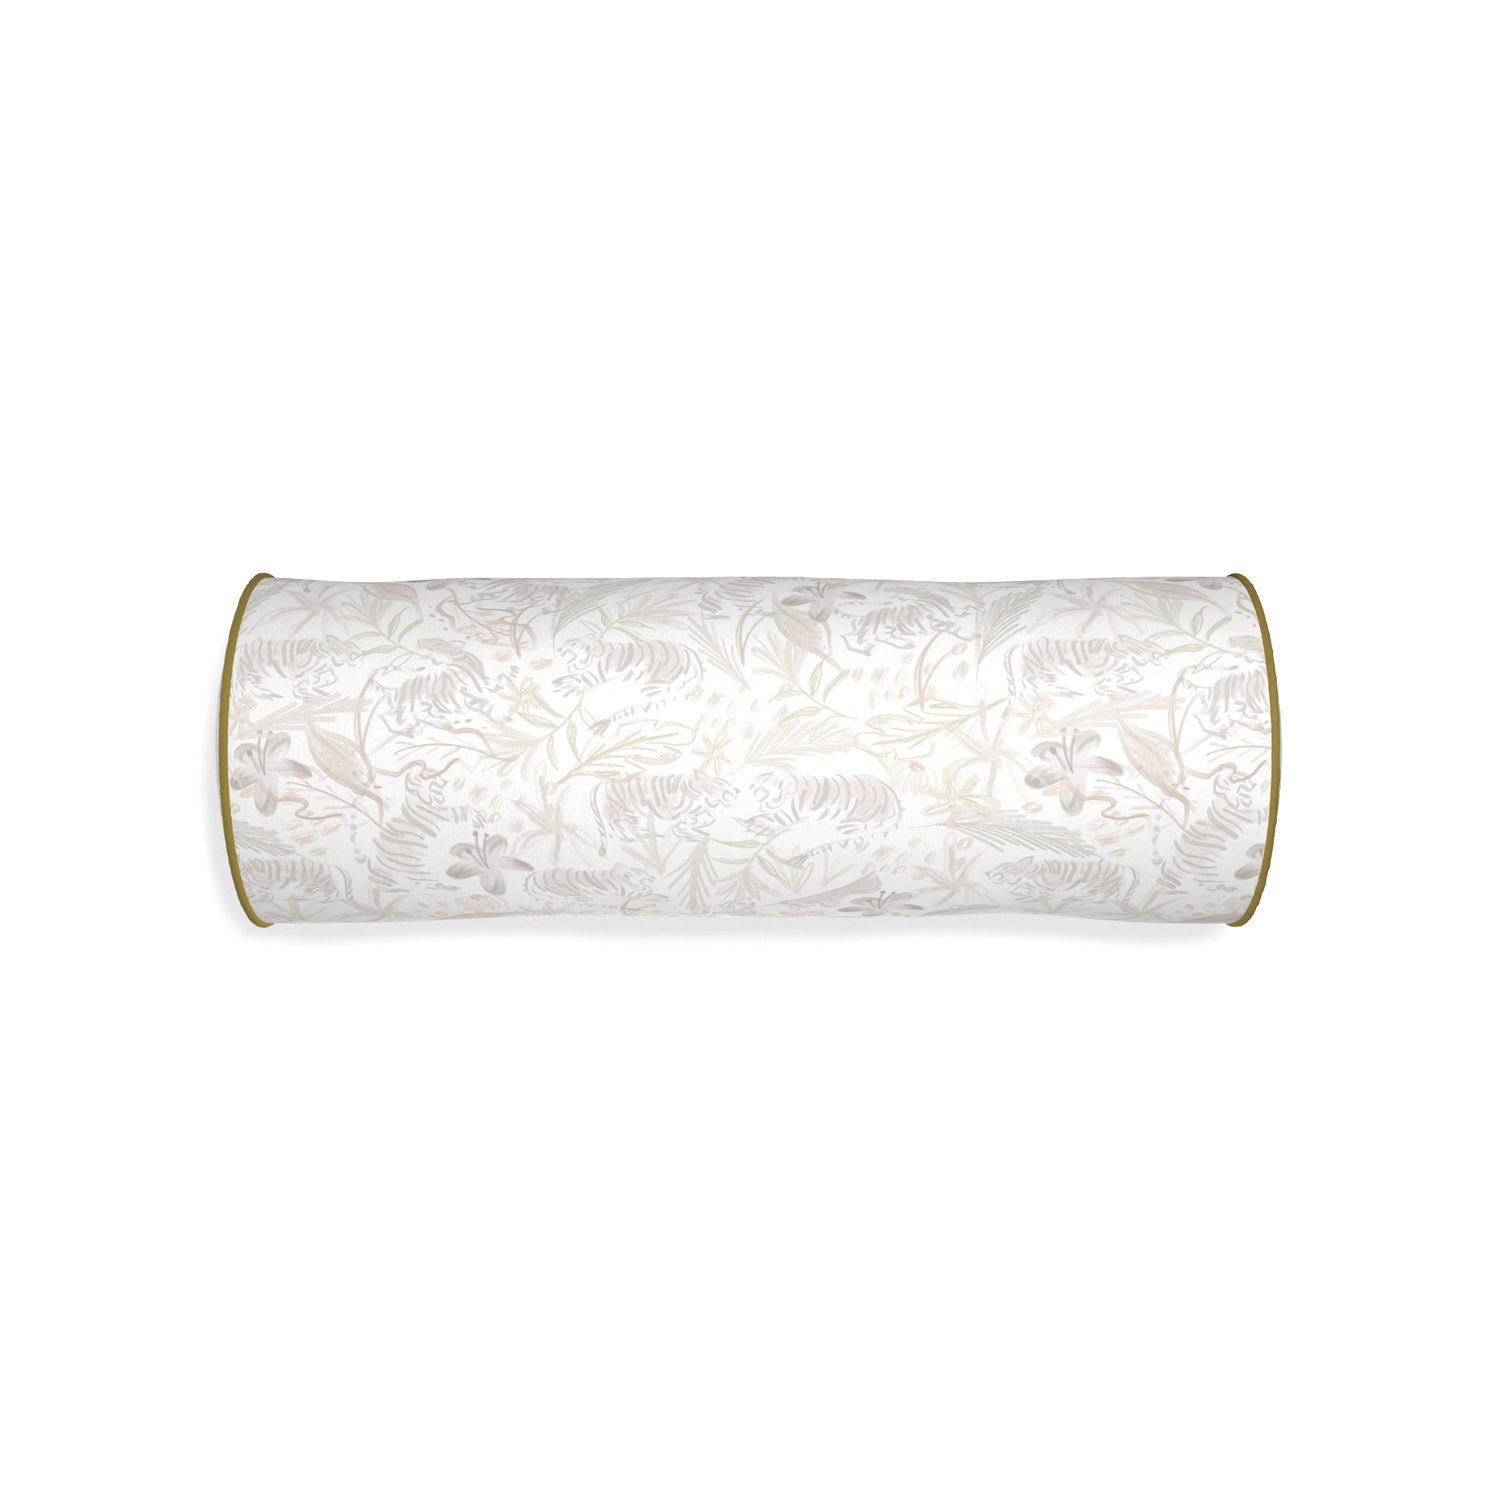 Bolster frida sand custom beige chinoiserie tigerpillow with c piping on white background